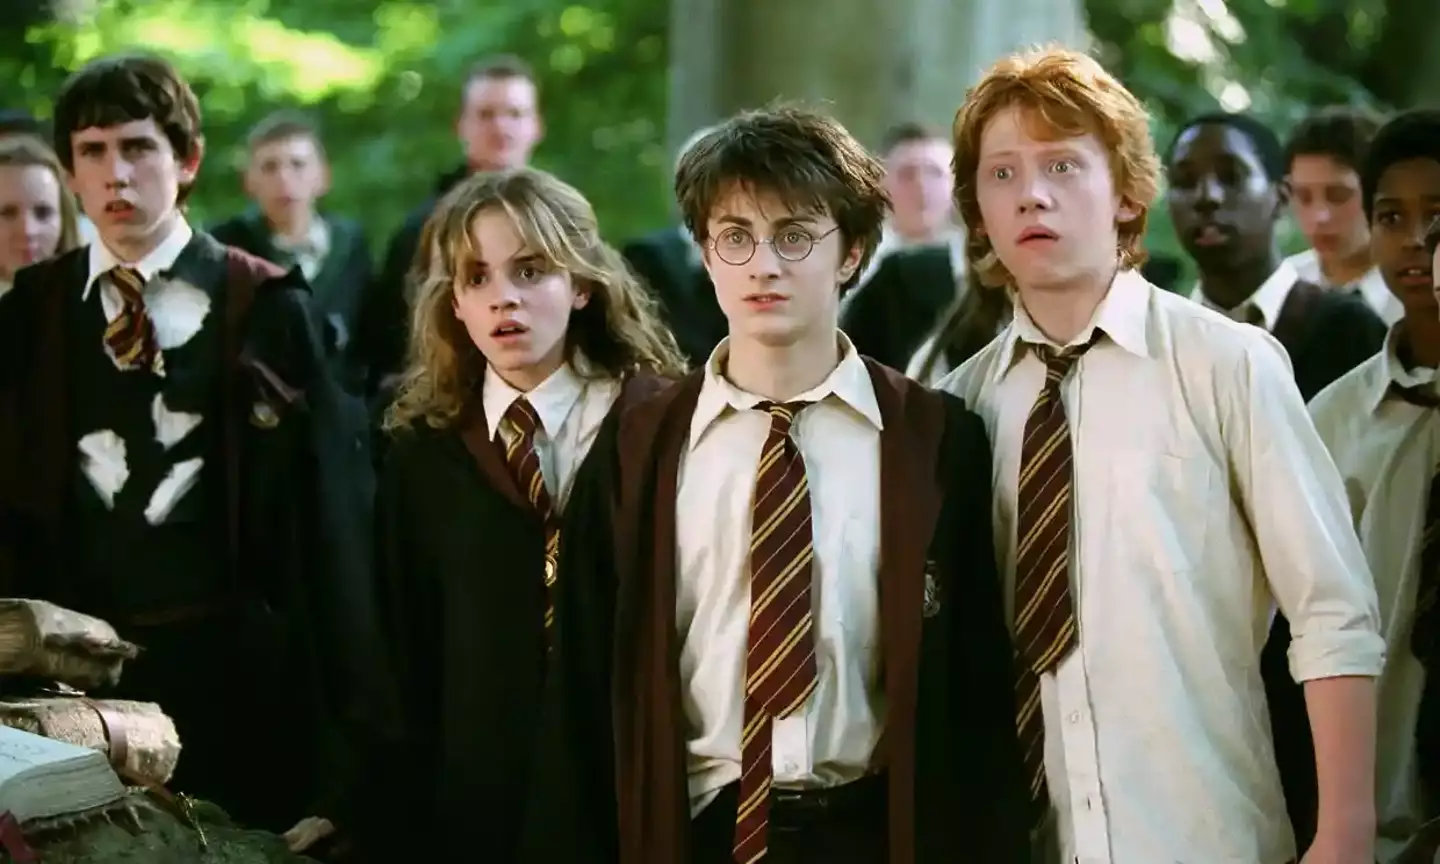 Stars of the film series have previously criticised Rowling.